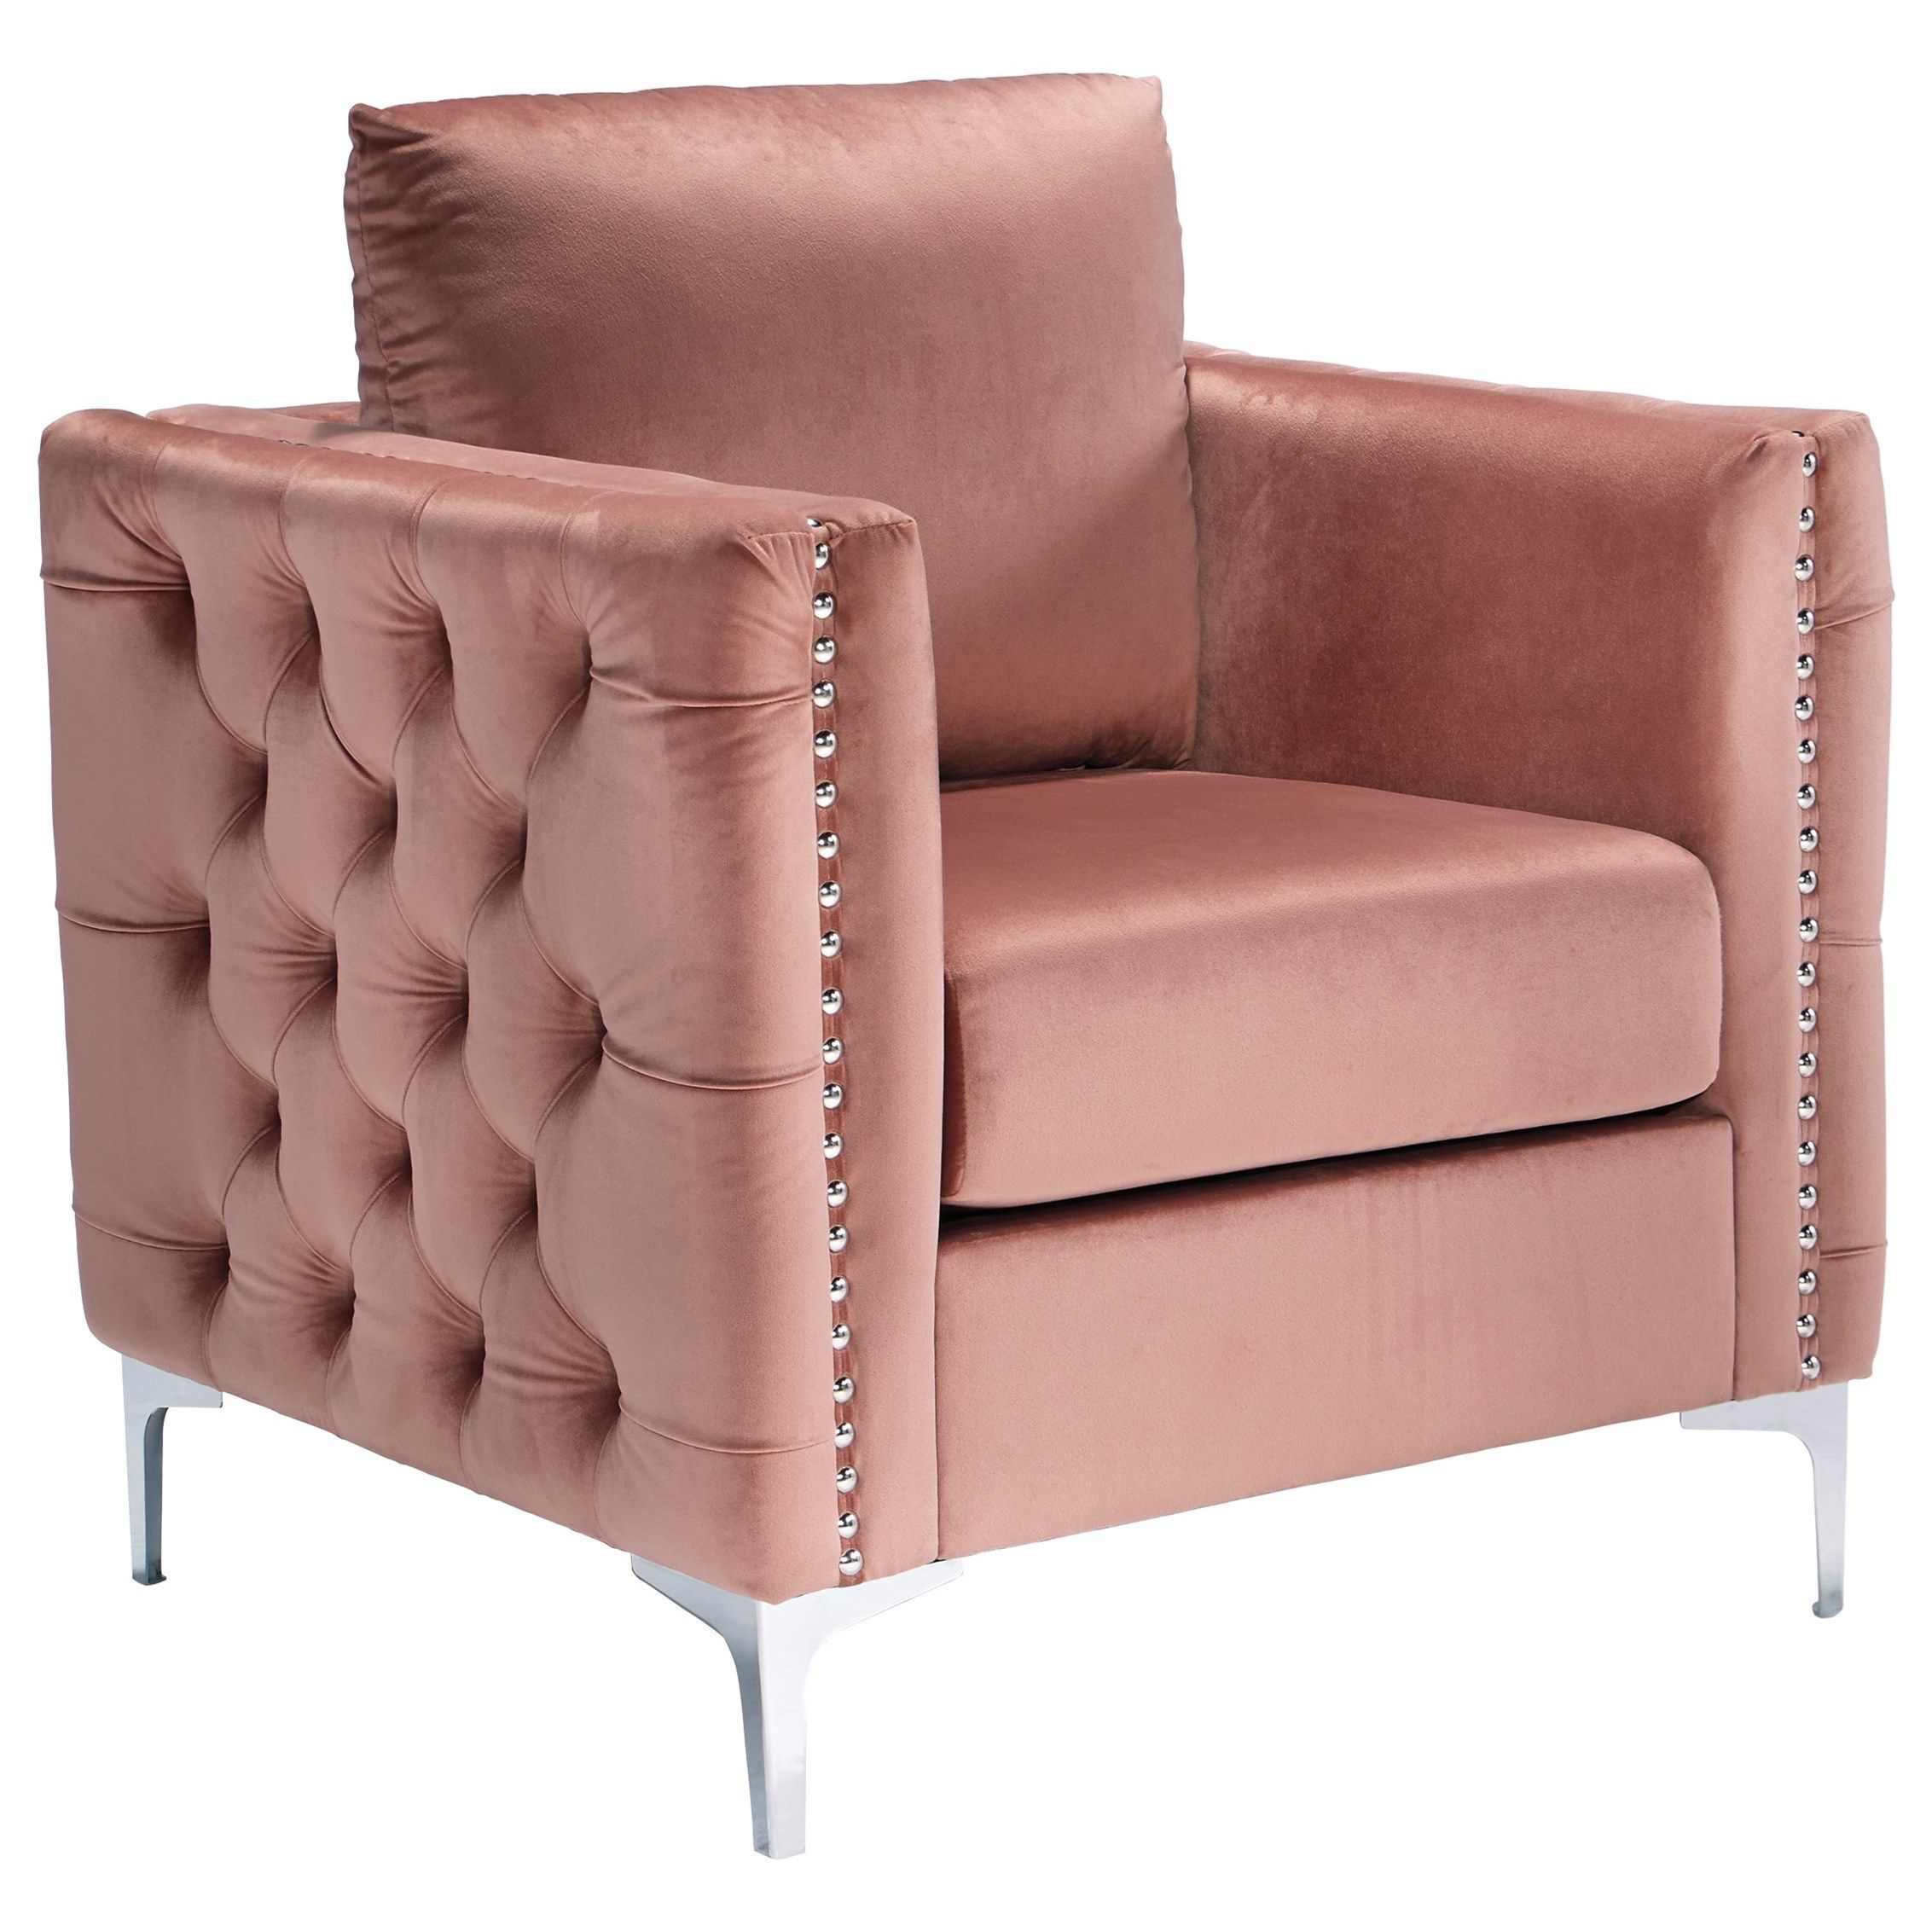 Lizmont Glam Blush Pink Velvet Accent Chair With Tufted Sidessignature  Designashley At Royal Furniture Pertaining To Velvet Tufted Accent Chairs (View 16 of 20)